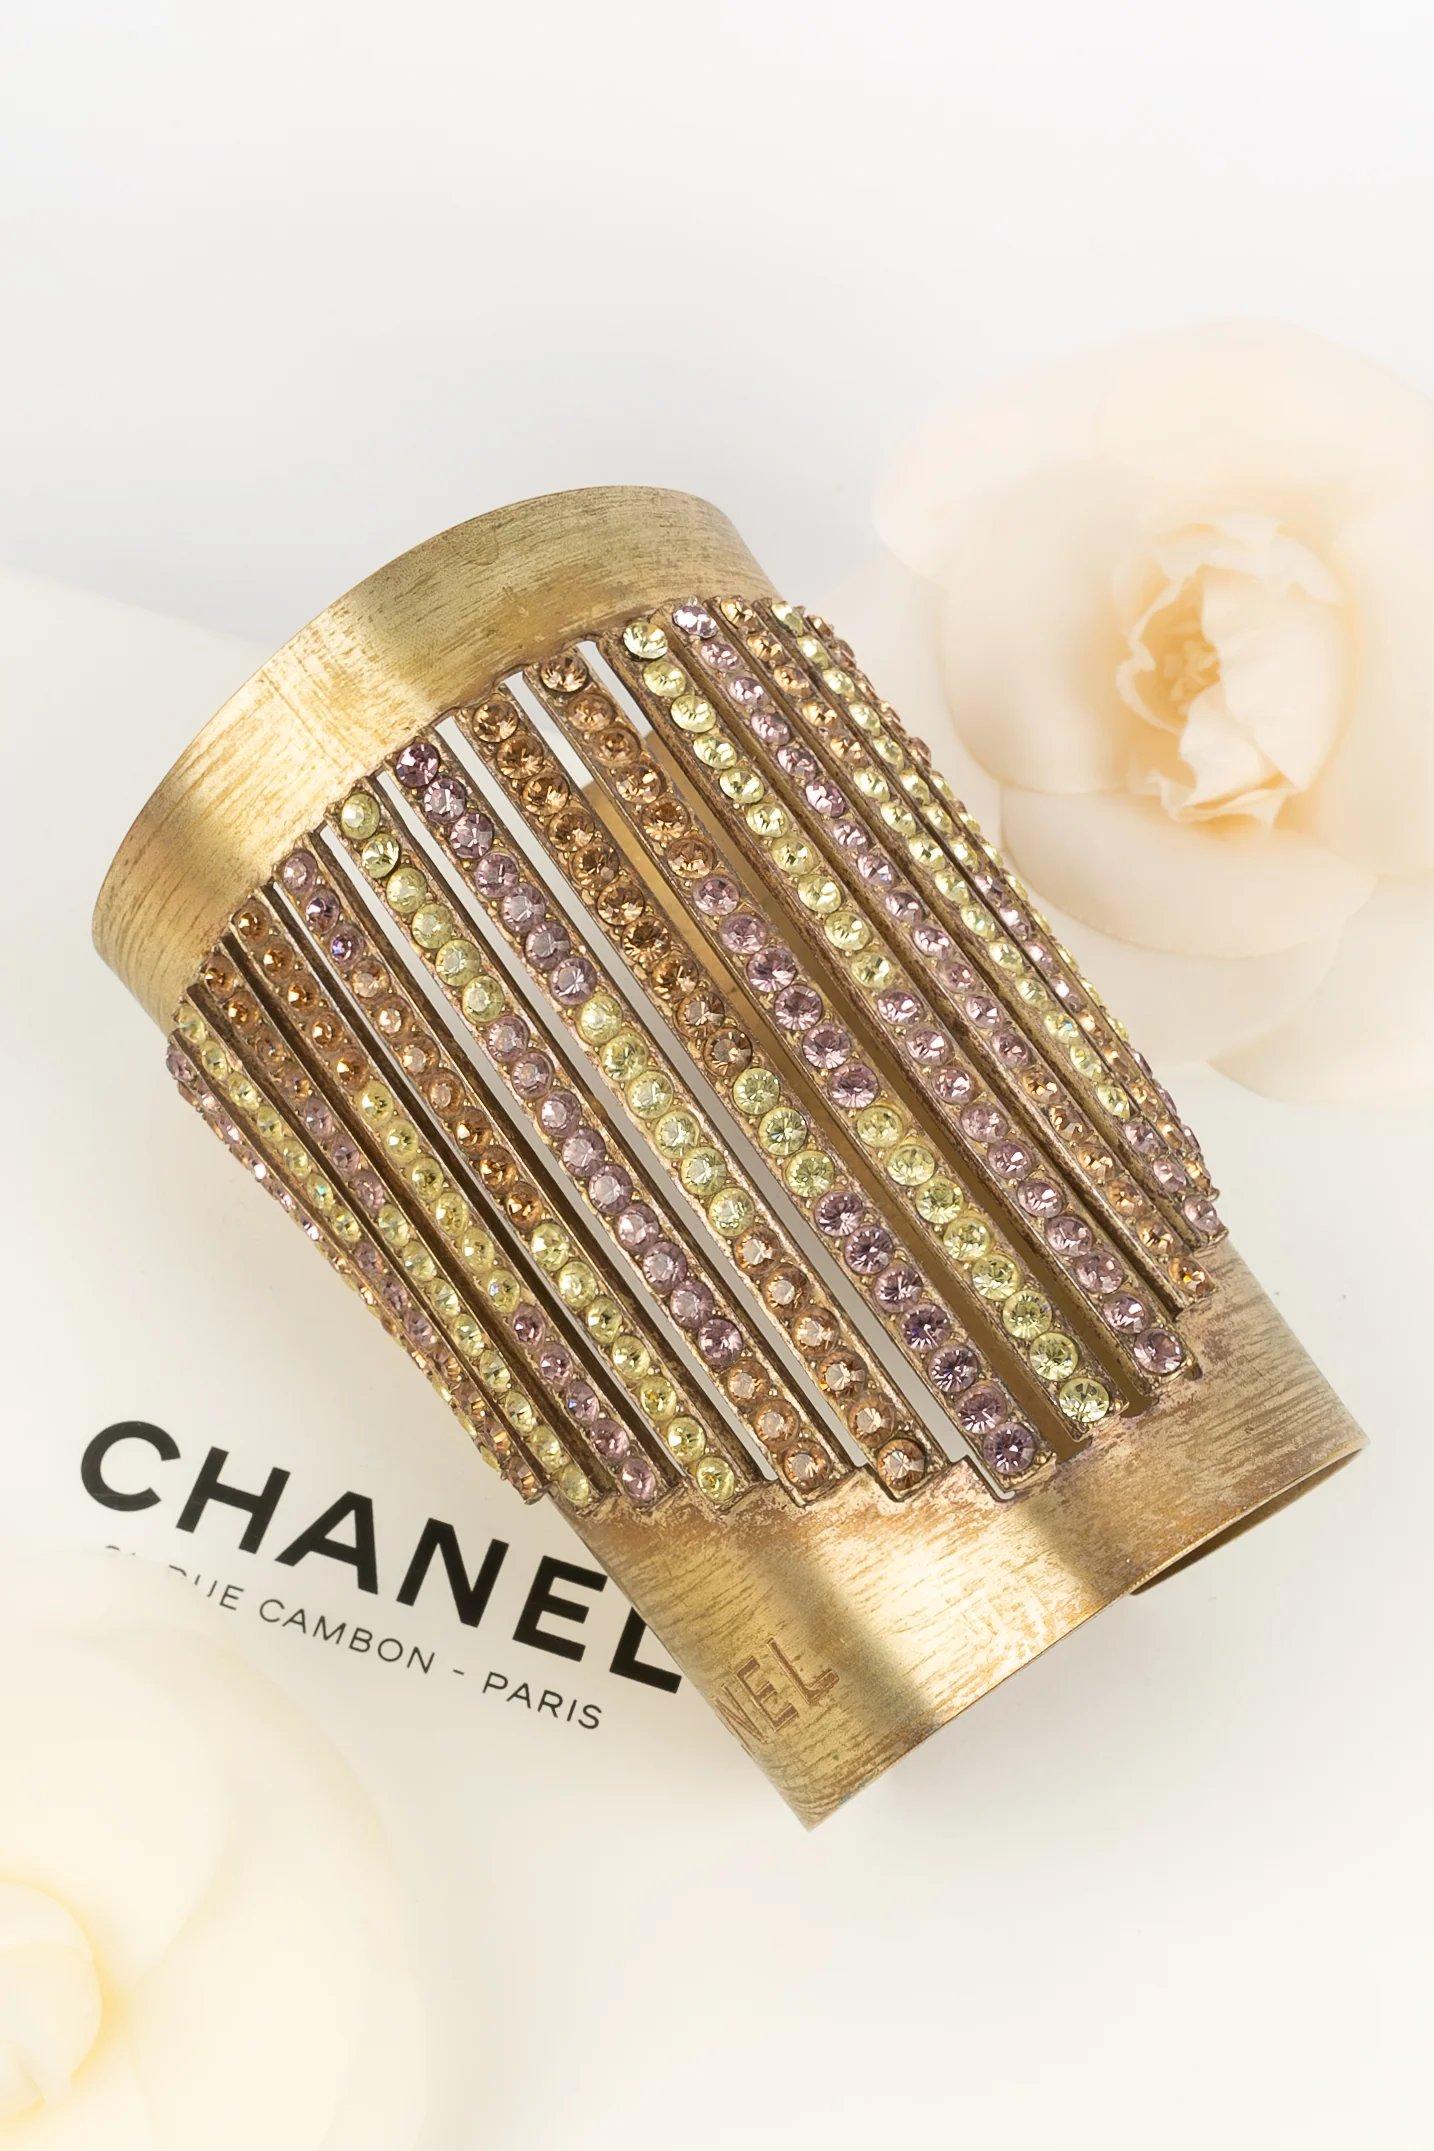 Chanel Cuff Bracelet in Golden Metal Sleeve Paved with Multicolored Rhinestones For Sale 2